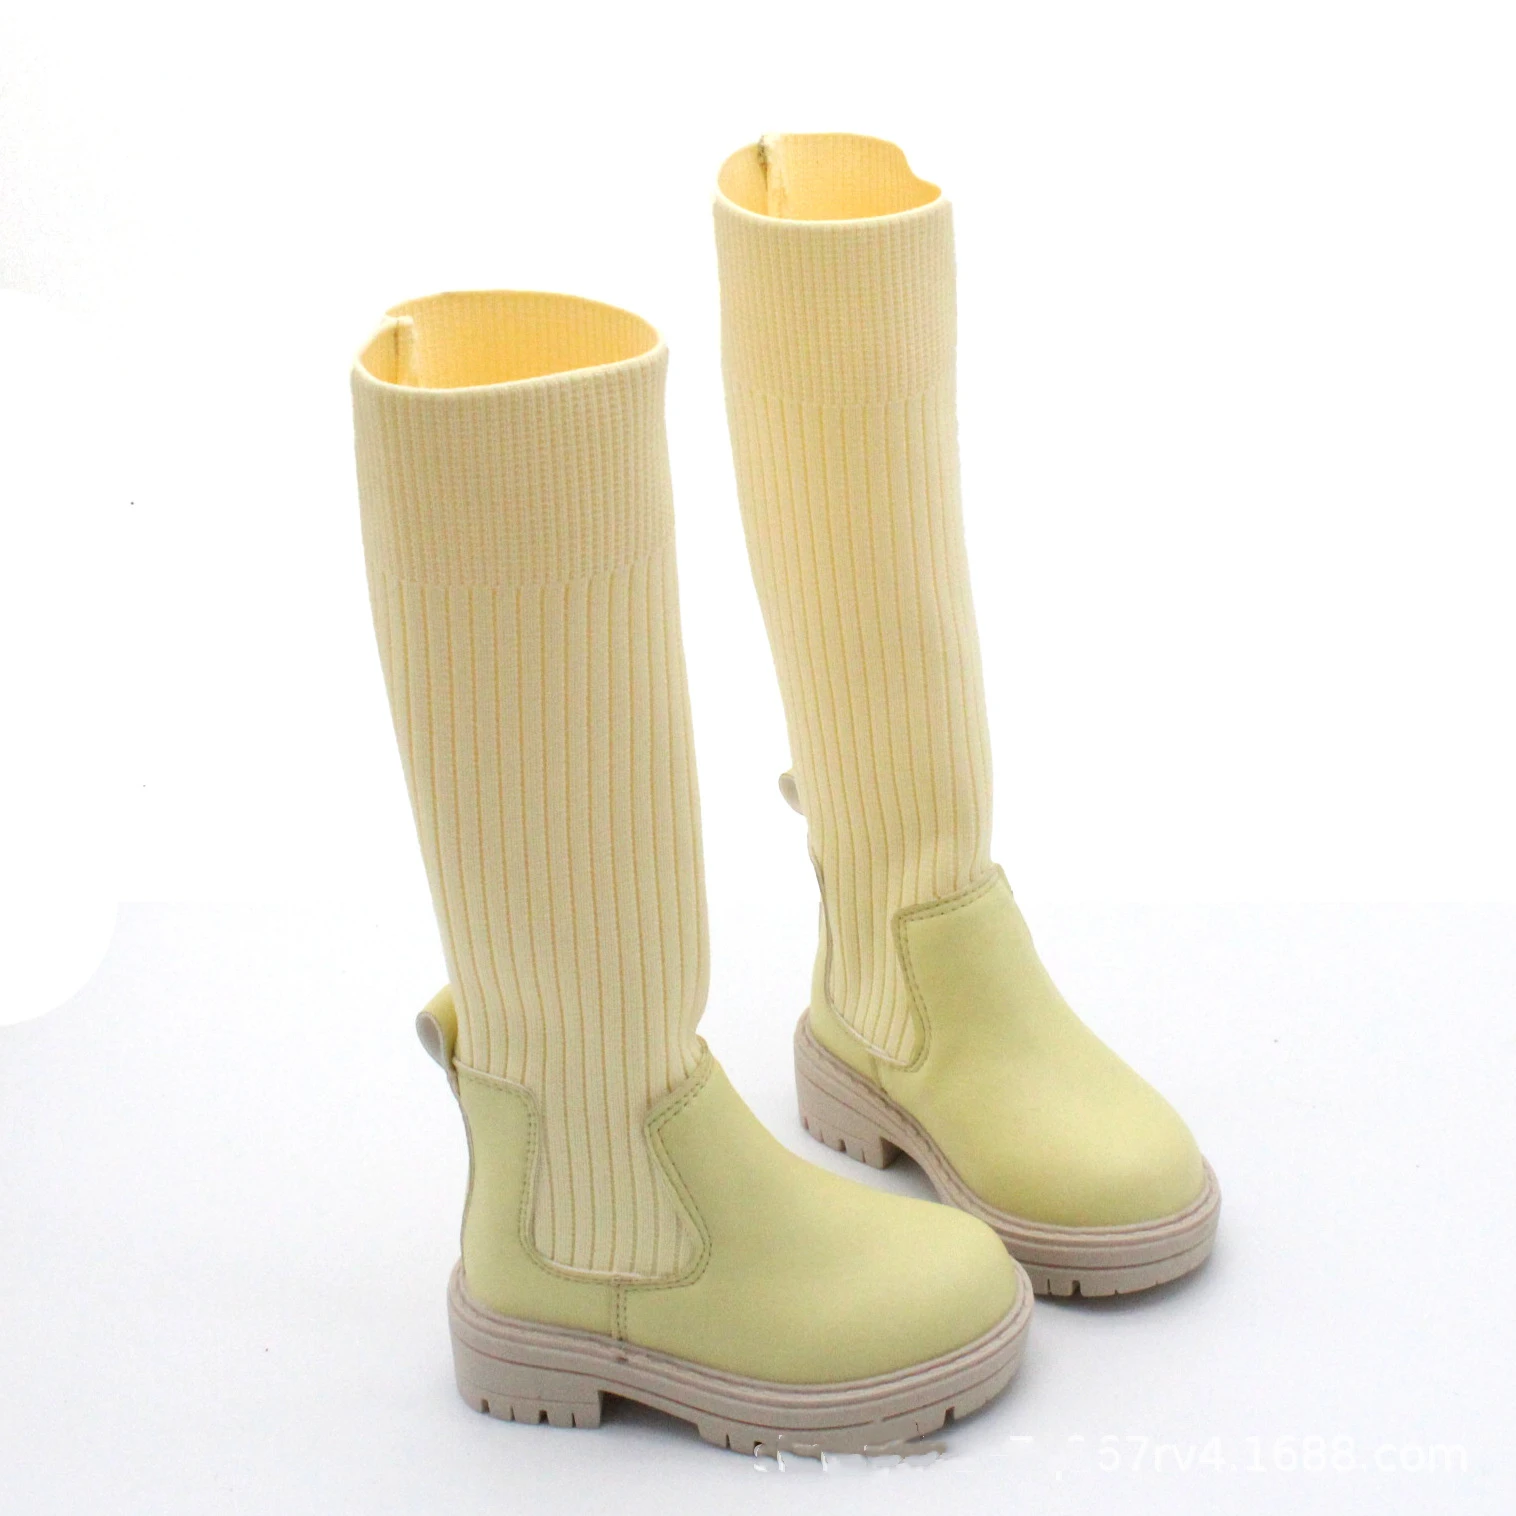 2022 Autumn toddler girls fashion long boots knitted boots elastic socks high boots kids over the knee baby girl shoes